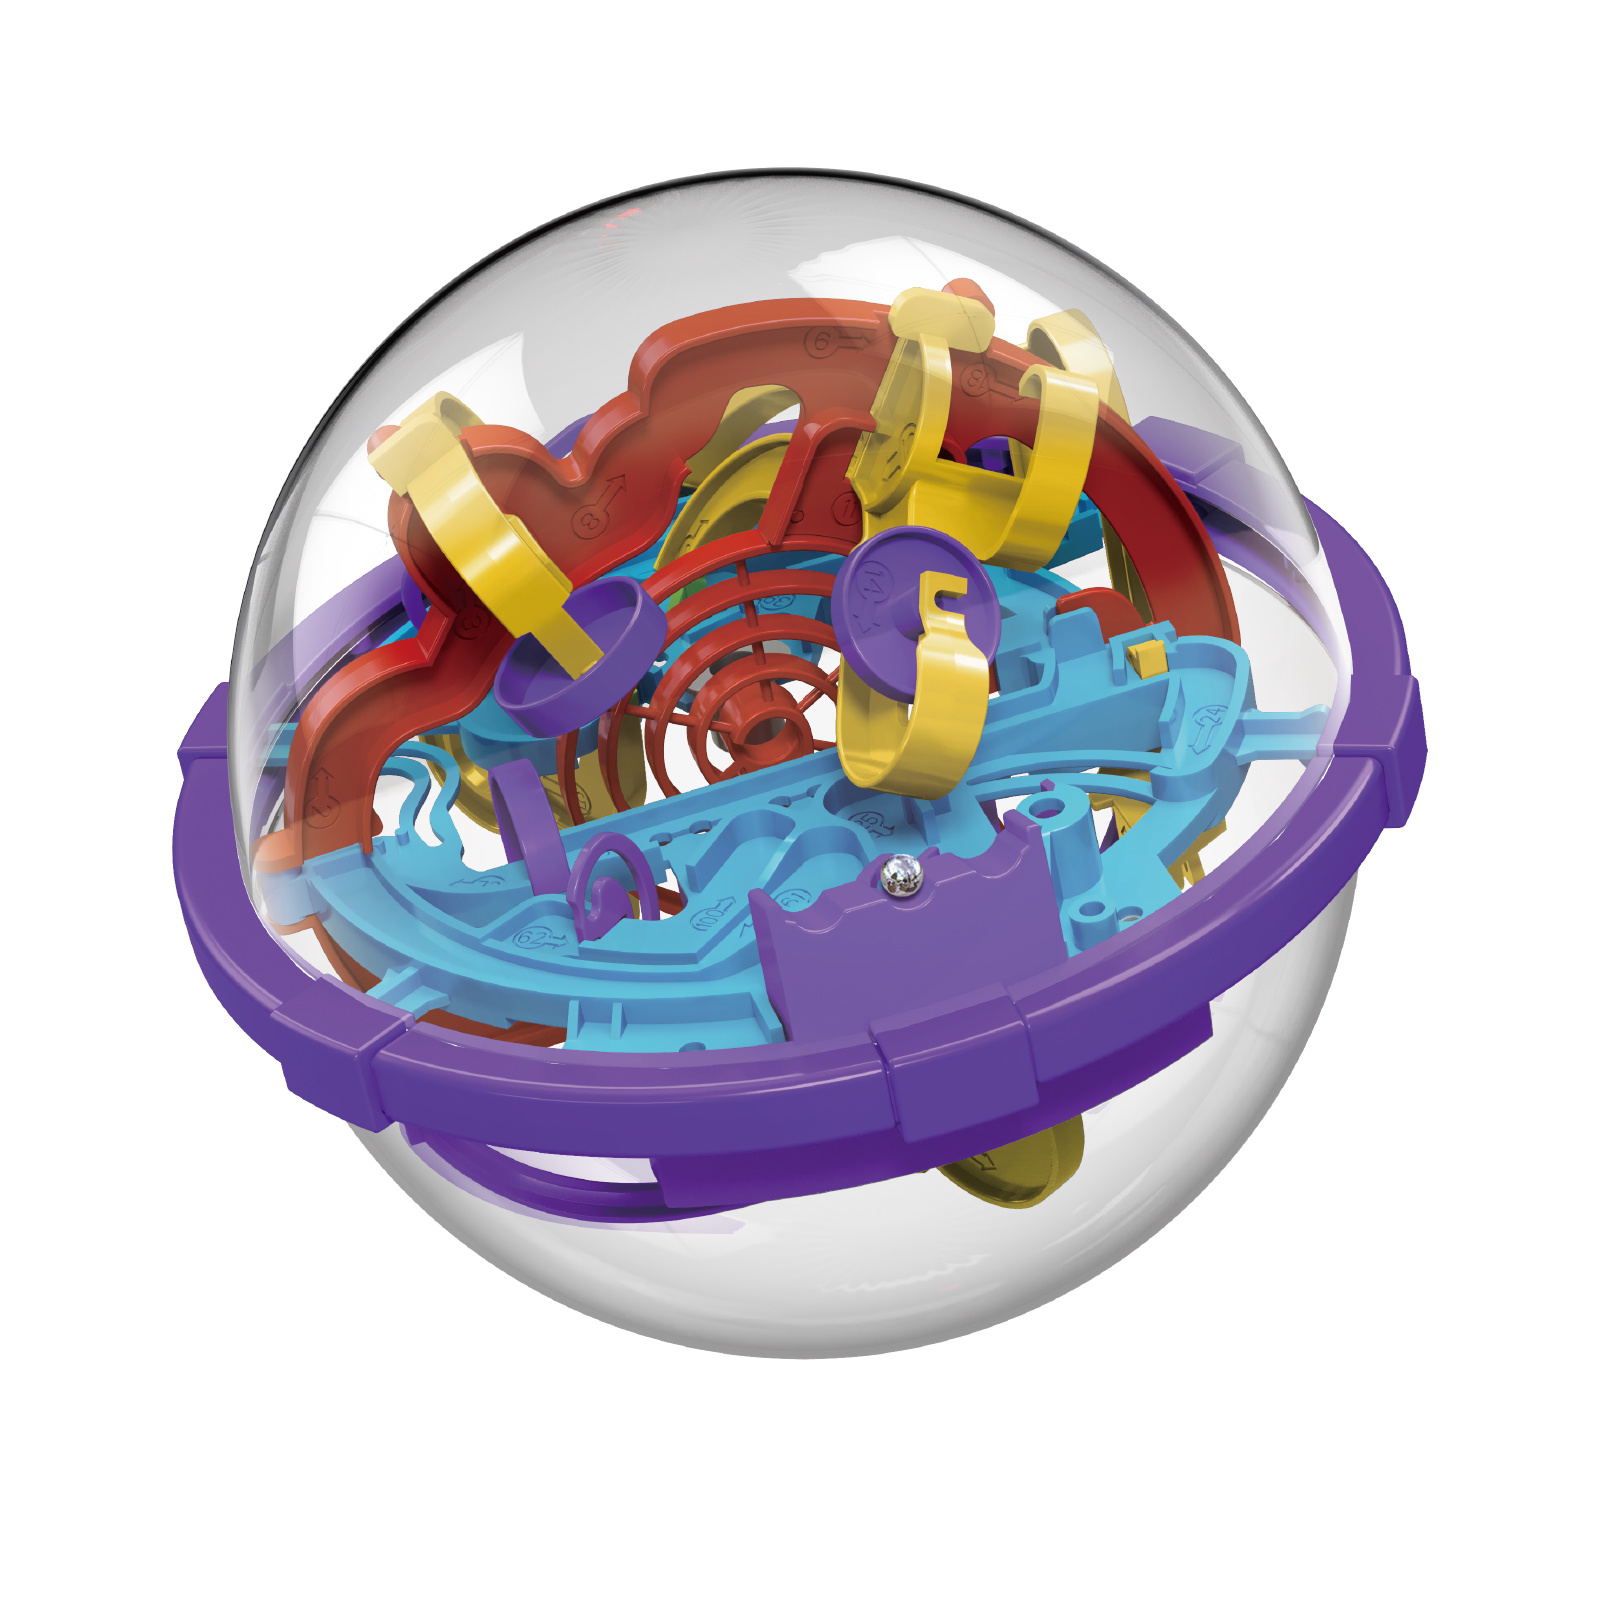 PERPLEXUS 'Epic' 3-D Spherical Maze - toys & games - by owner